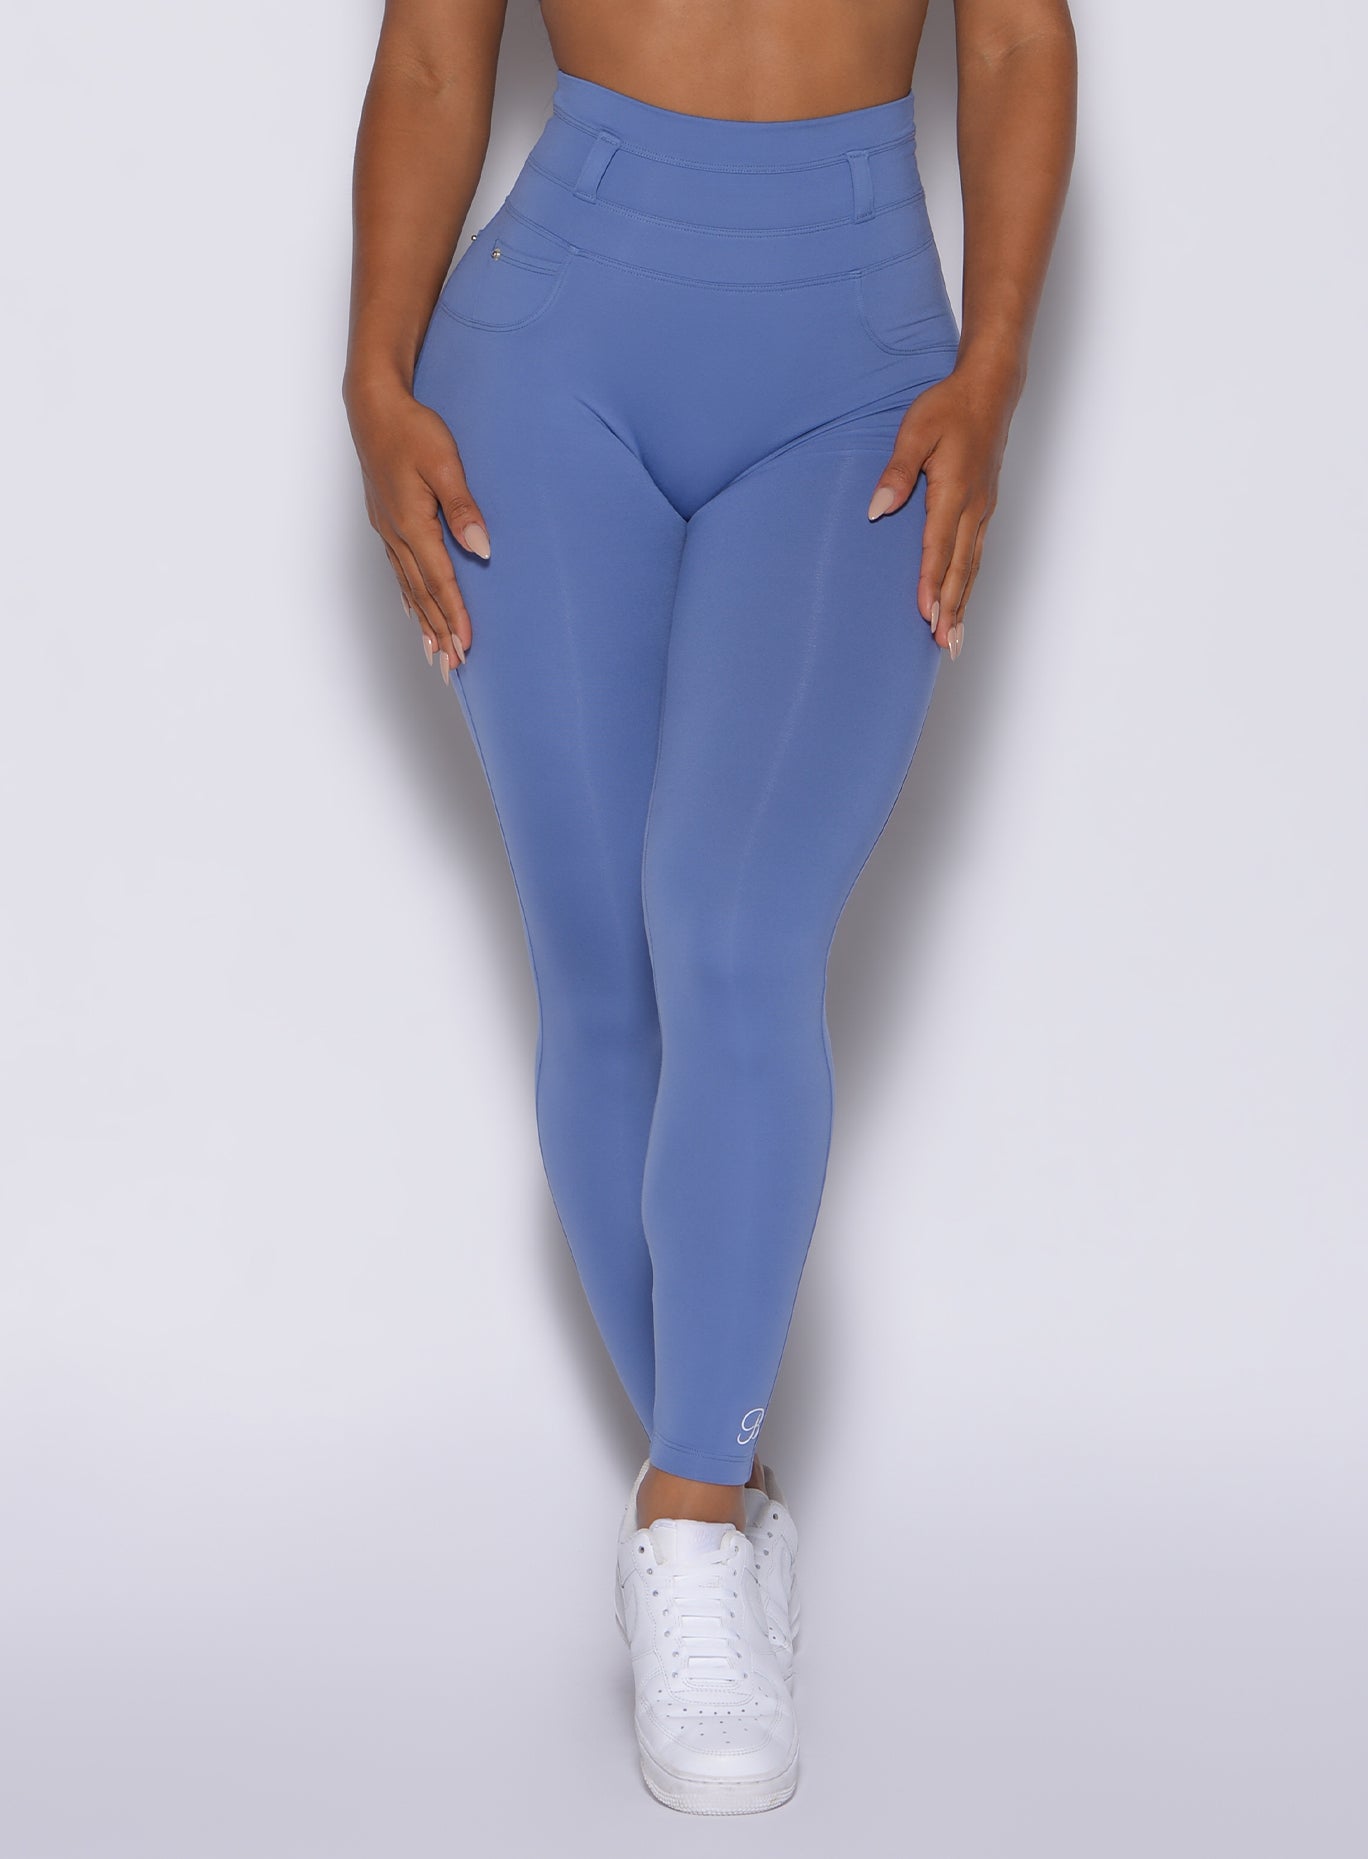 Front view of our peach bottoms leggings in denim blue color 